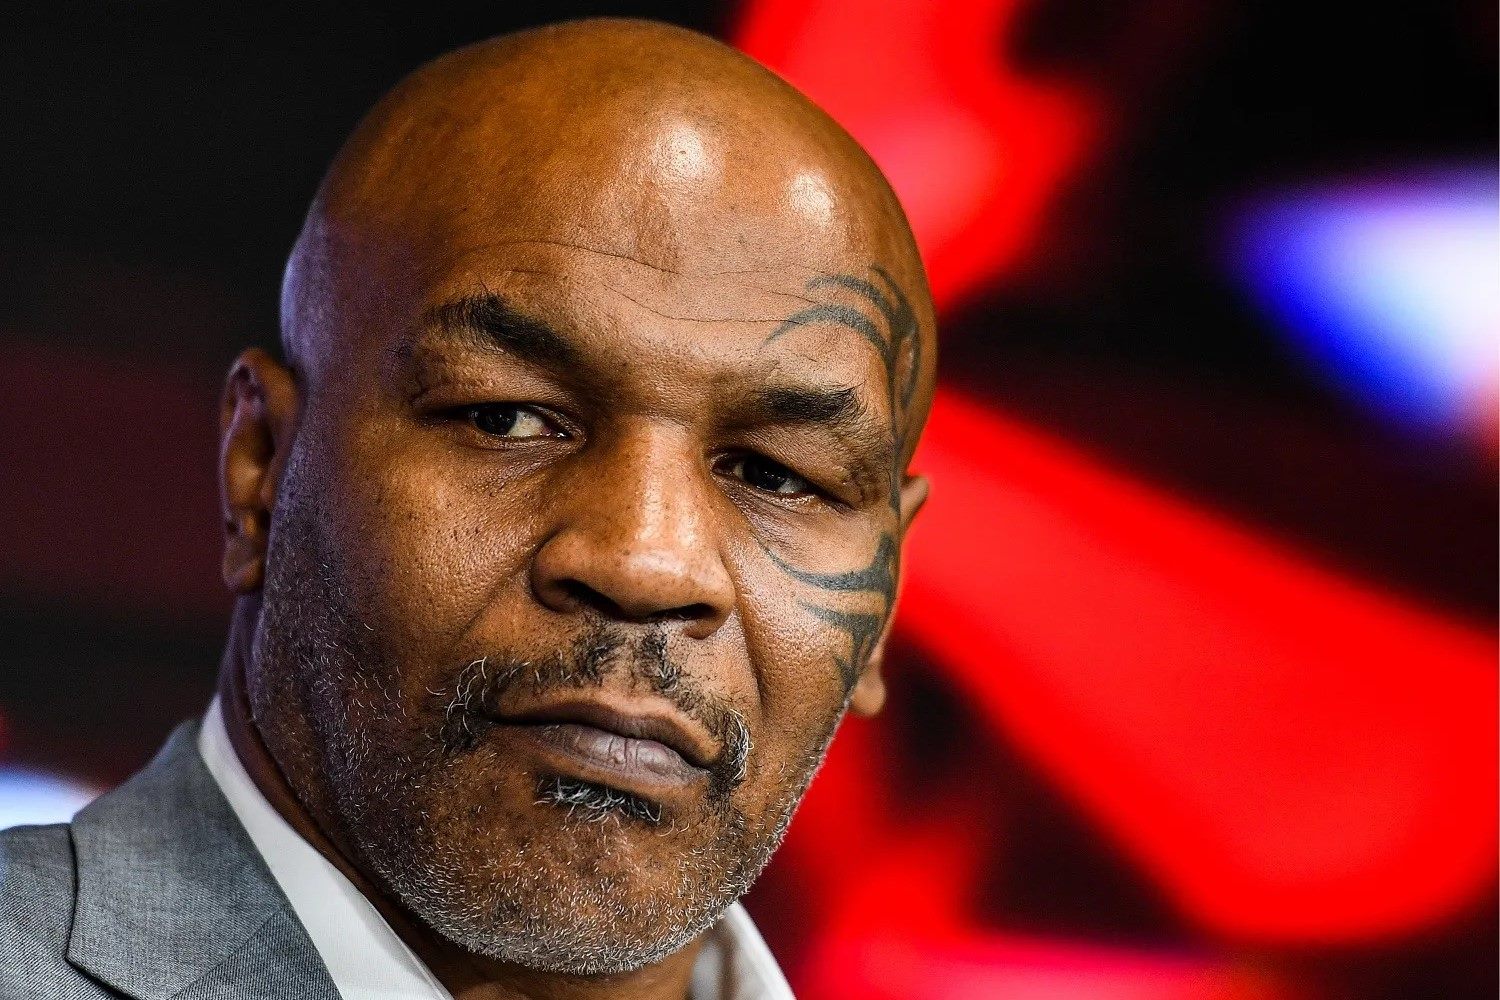 Mike Tyson's Surprising Hypocrisy: Is He Bound For Hell According To The Quran?